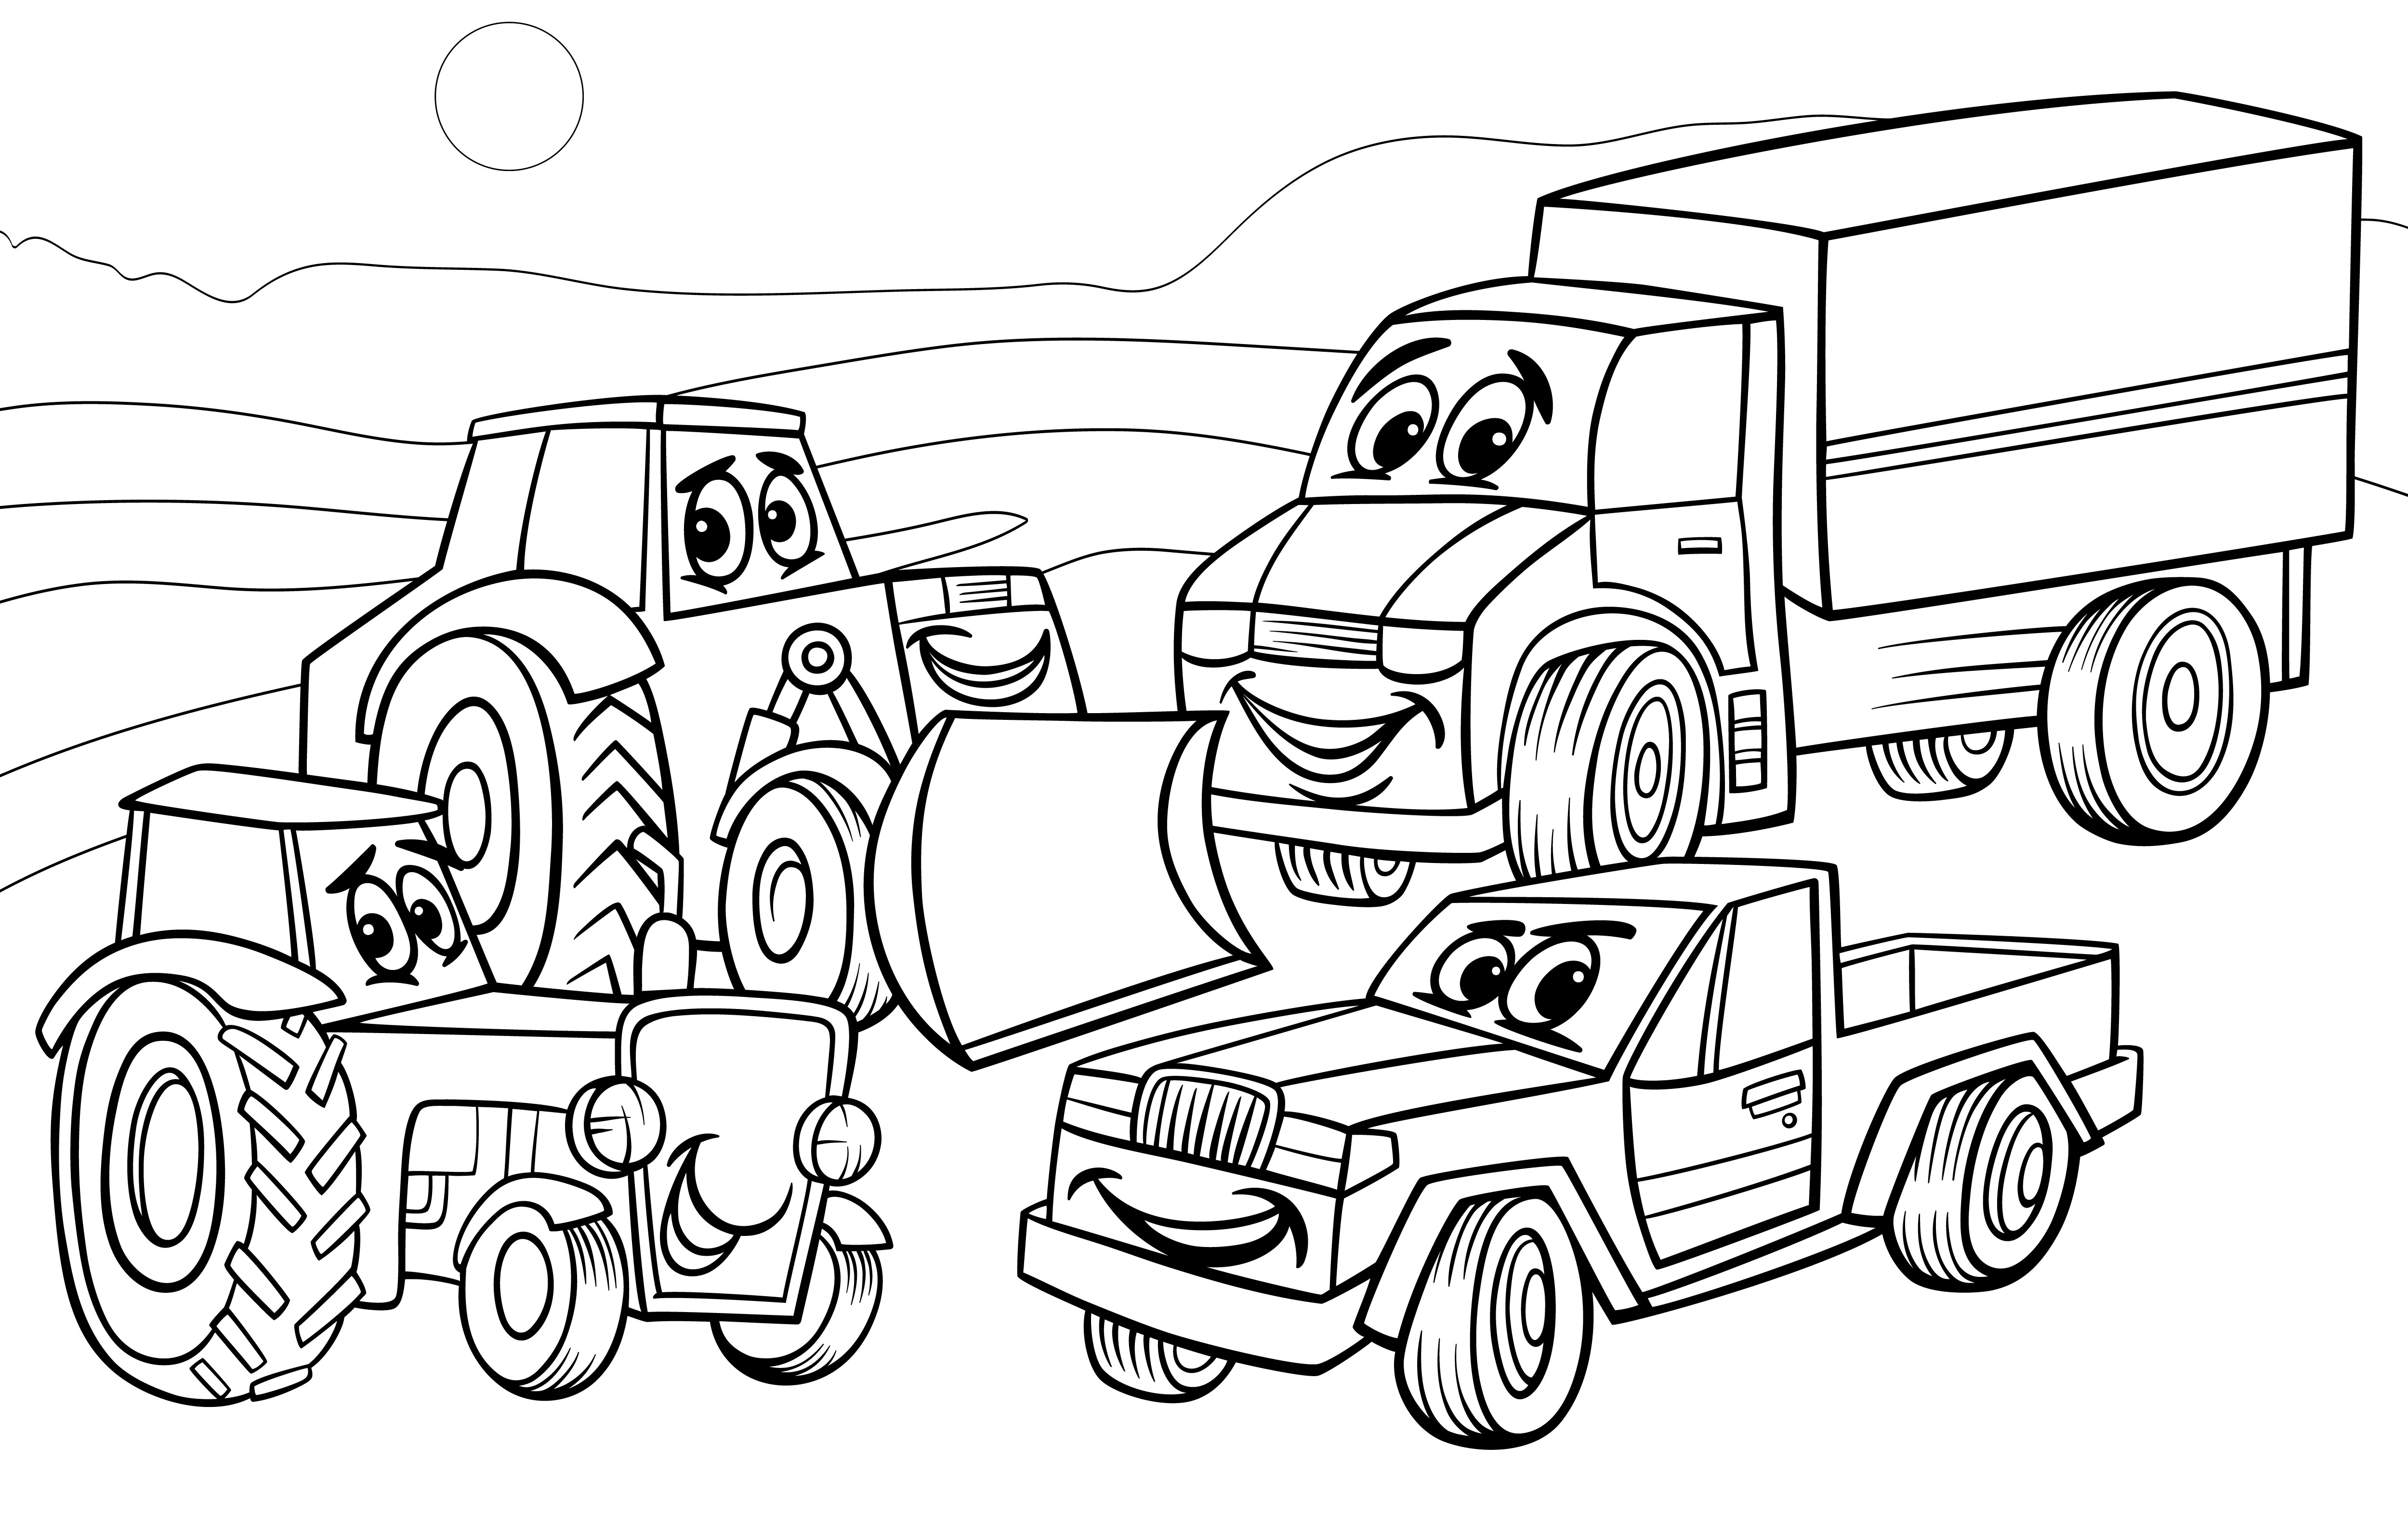 Home Coloring Pages For Boys
 Summer Activities Coloring Page for Boys Country Home